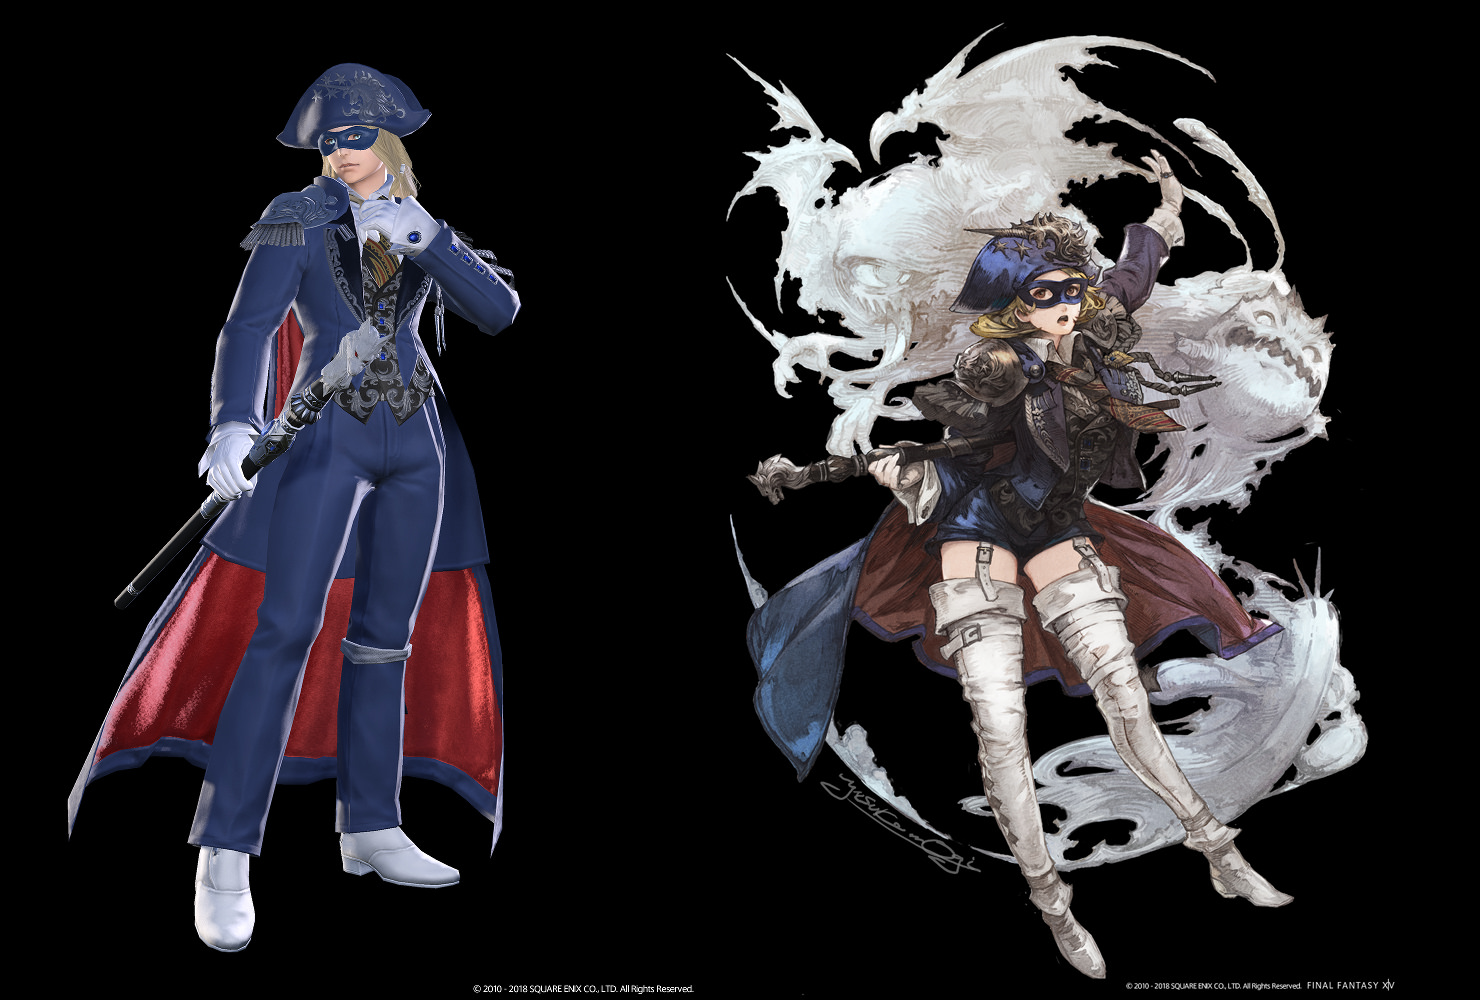 FFXIV Blue Mage leveling guide